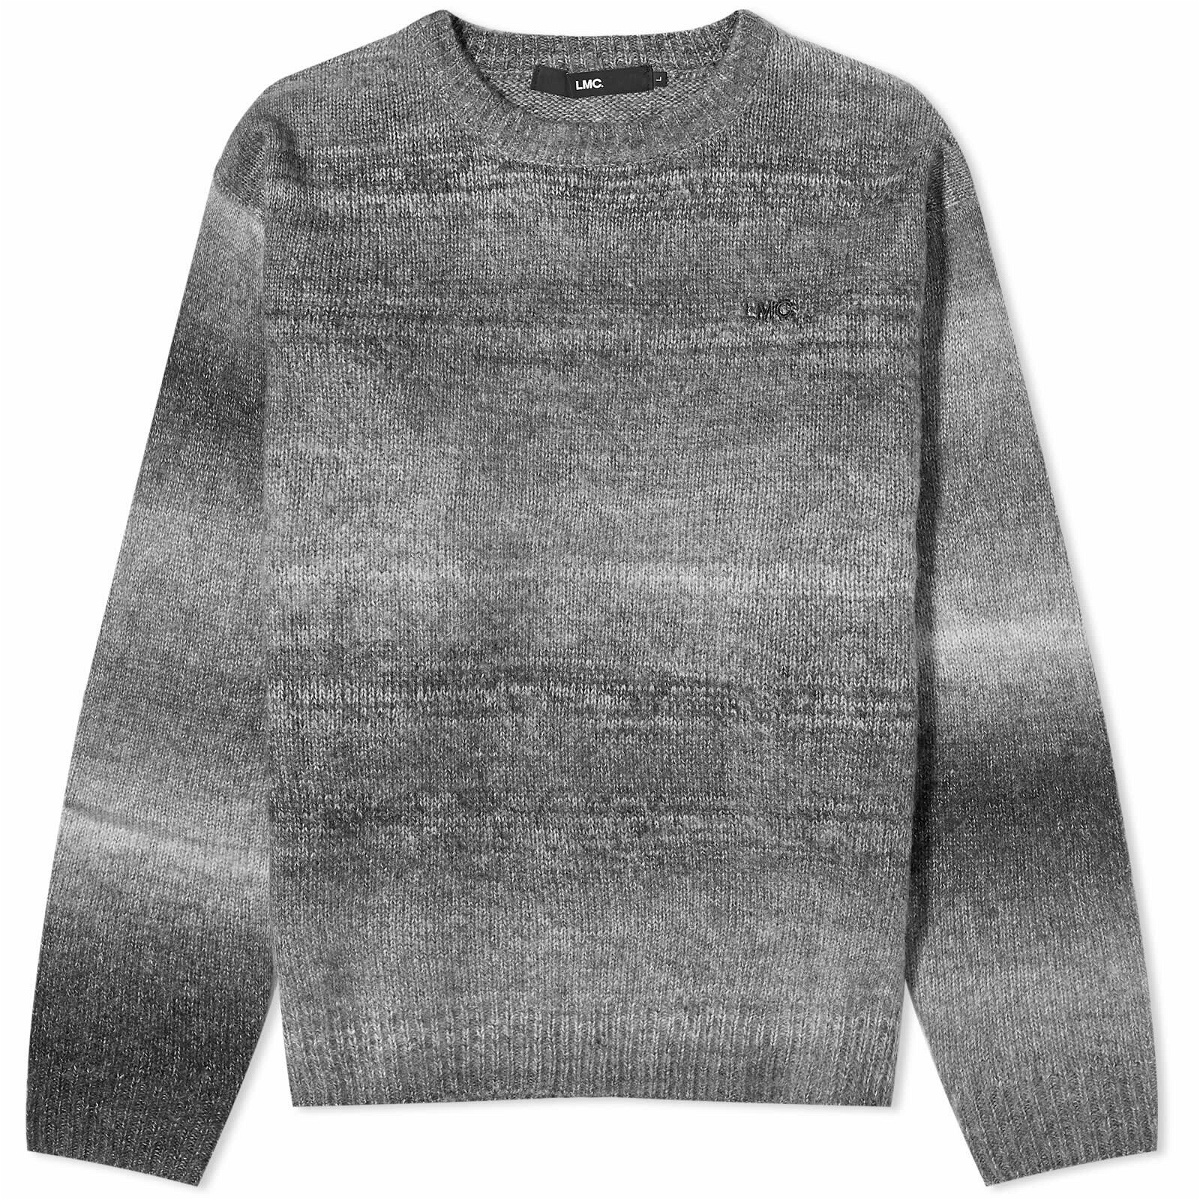 Photo: LMC Men's OG Ombre Brushed Knit Sweater in Charcoal